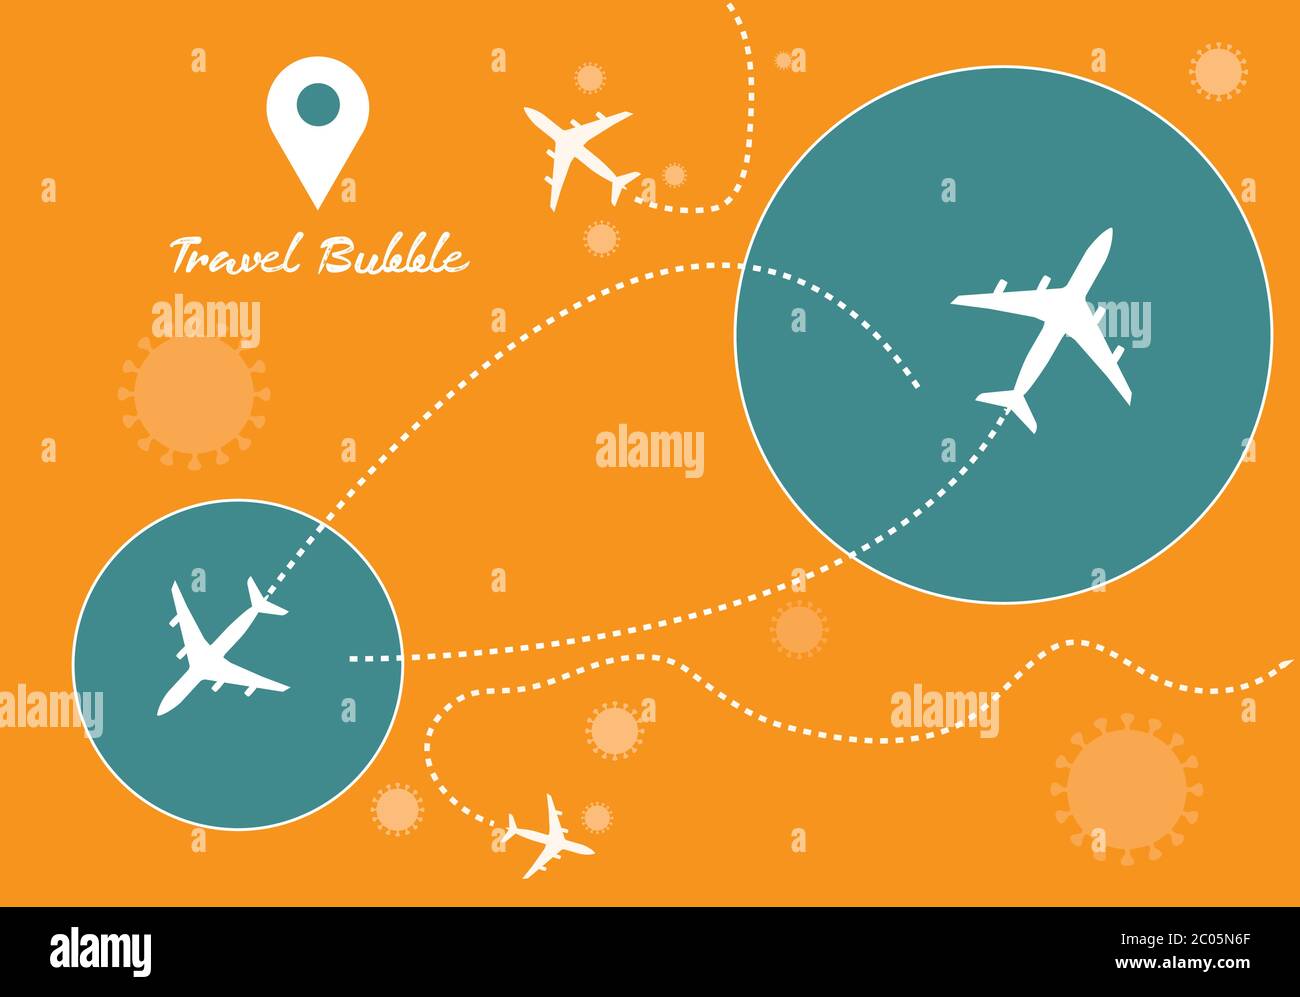 Bubble travel in bubble circle and airplane icon yellow background graphic vector art Stock Vector